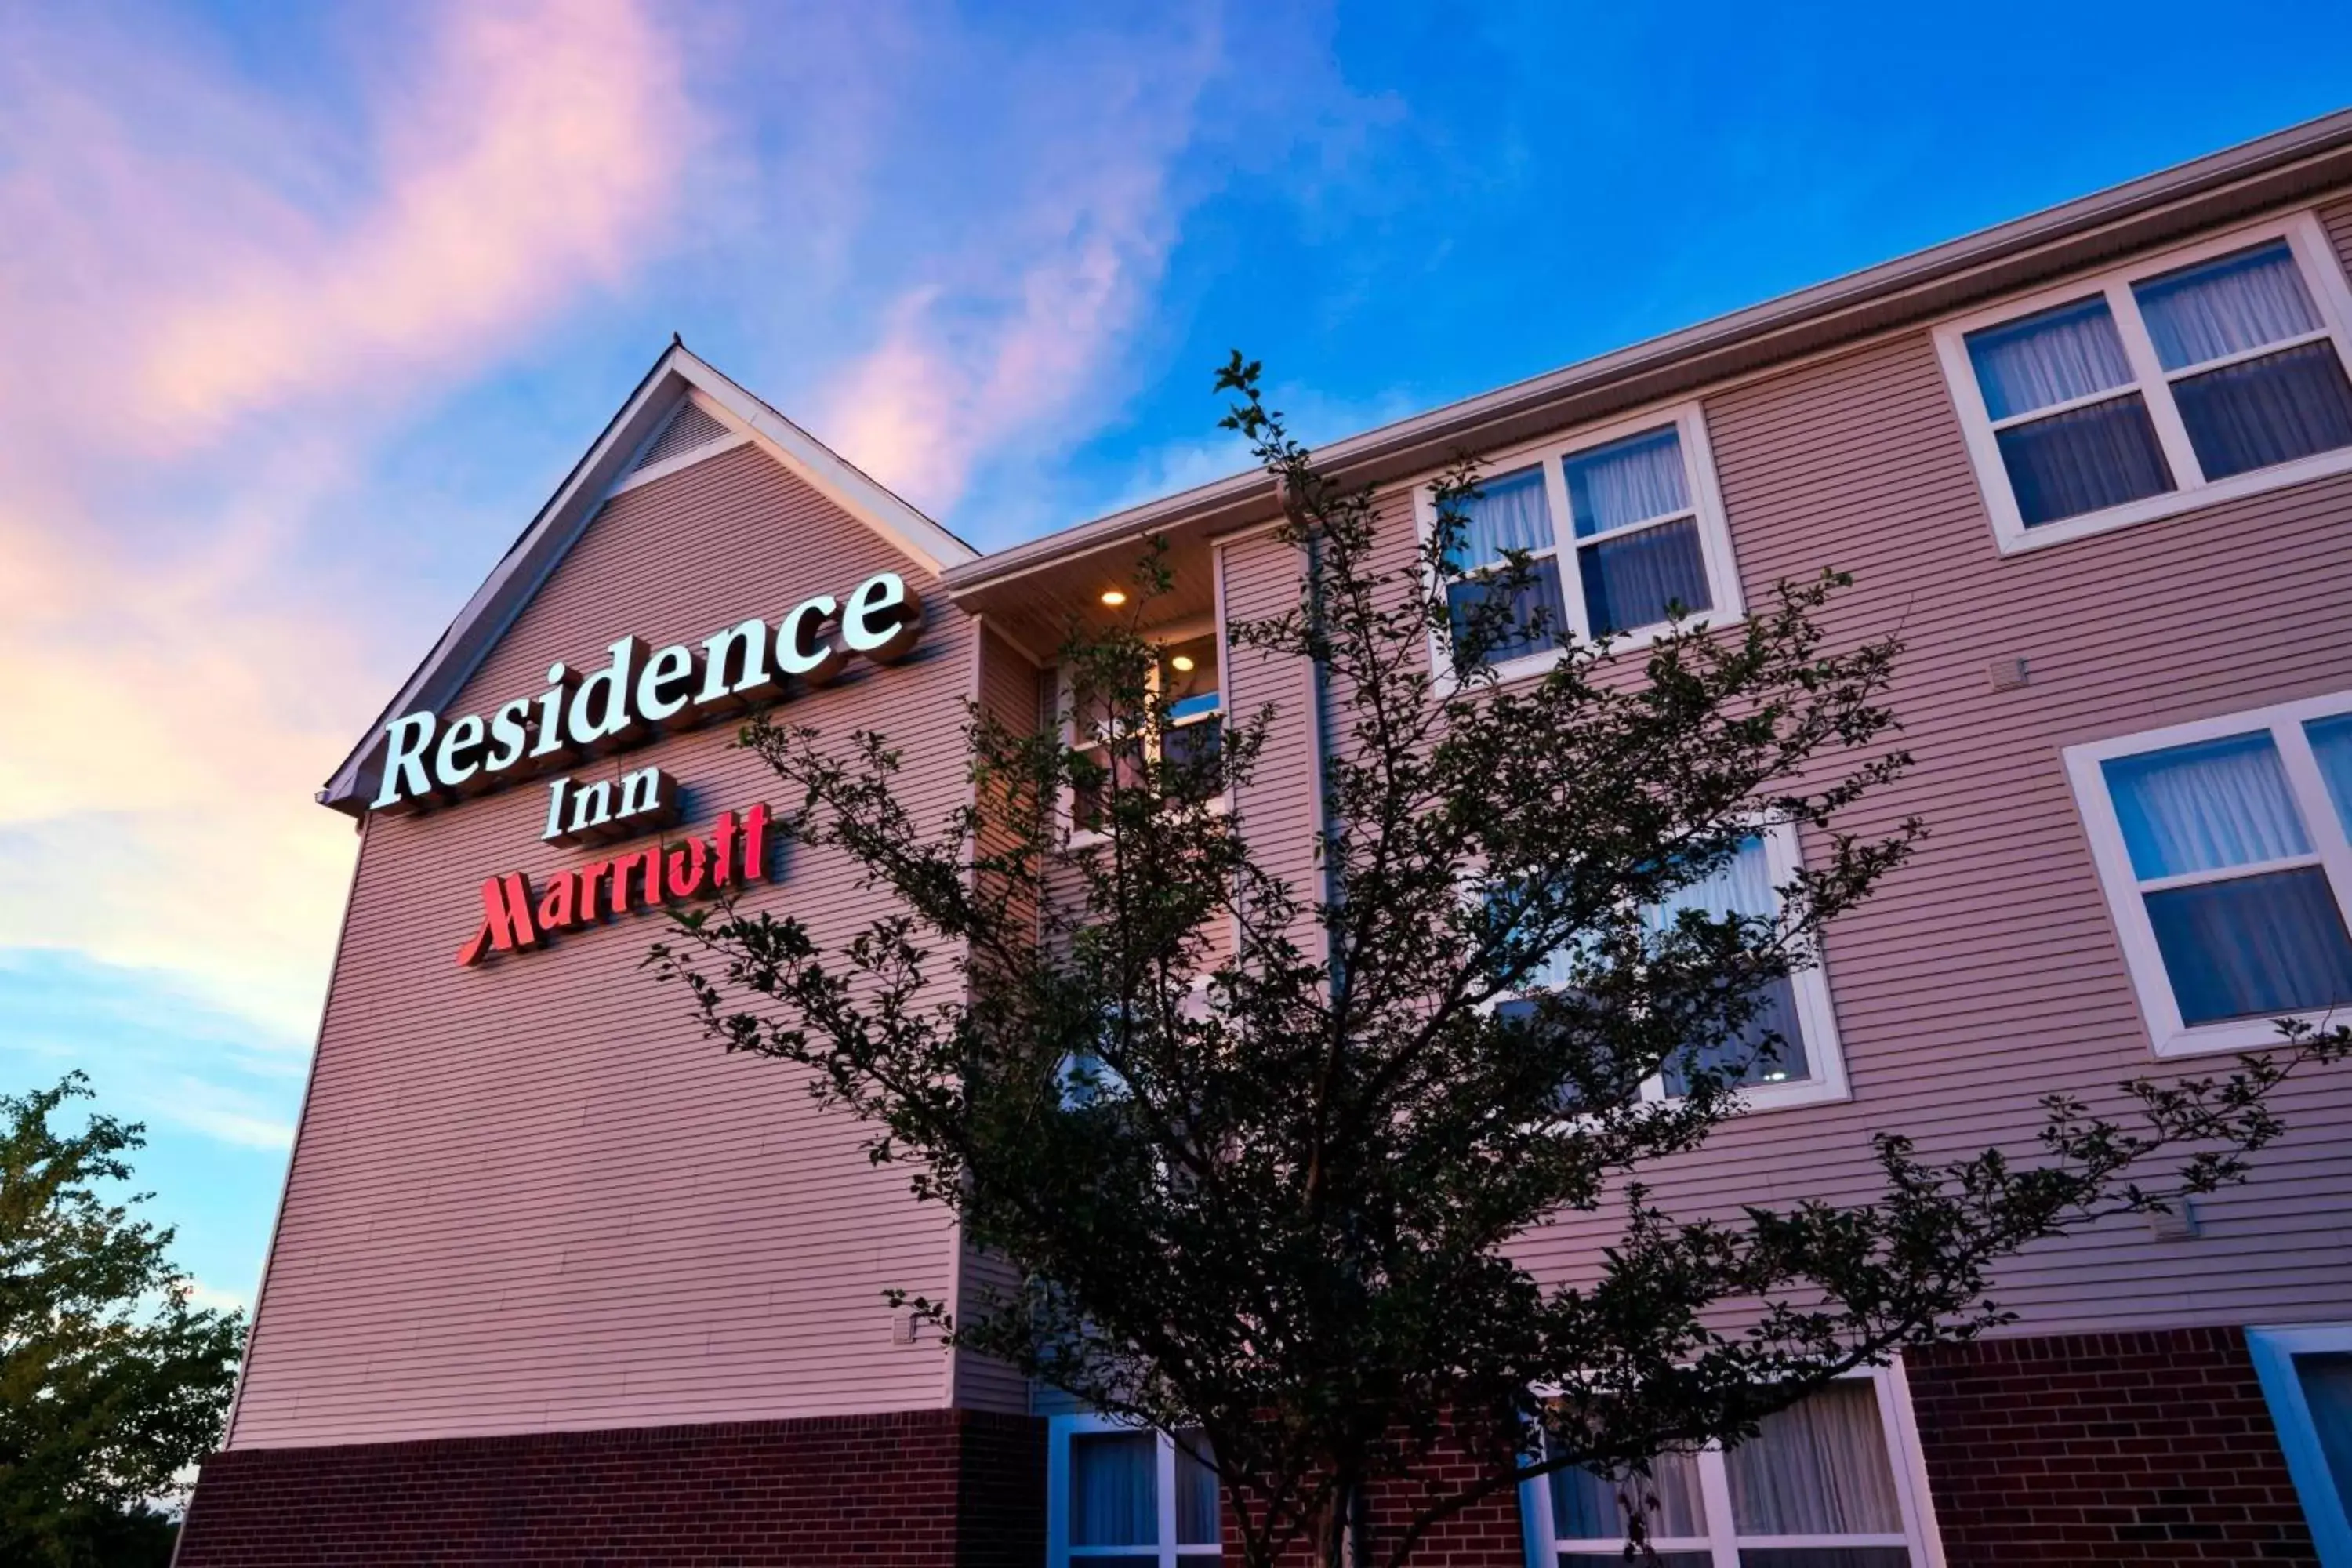 Property Building in Residence Inn Indianapolis Fishers